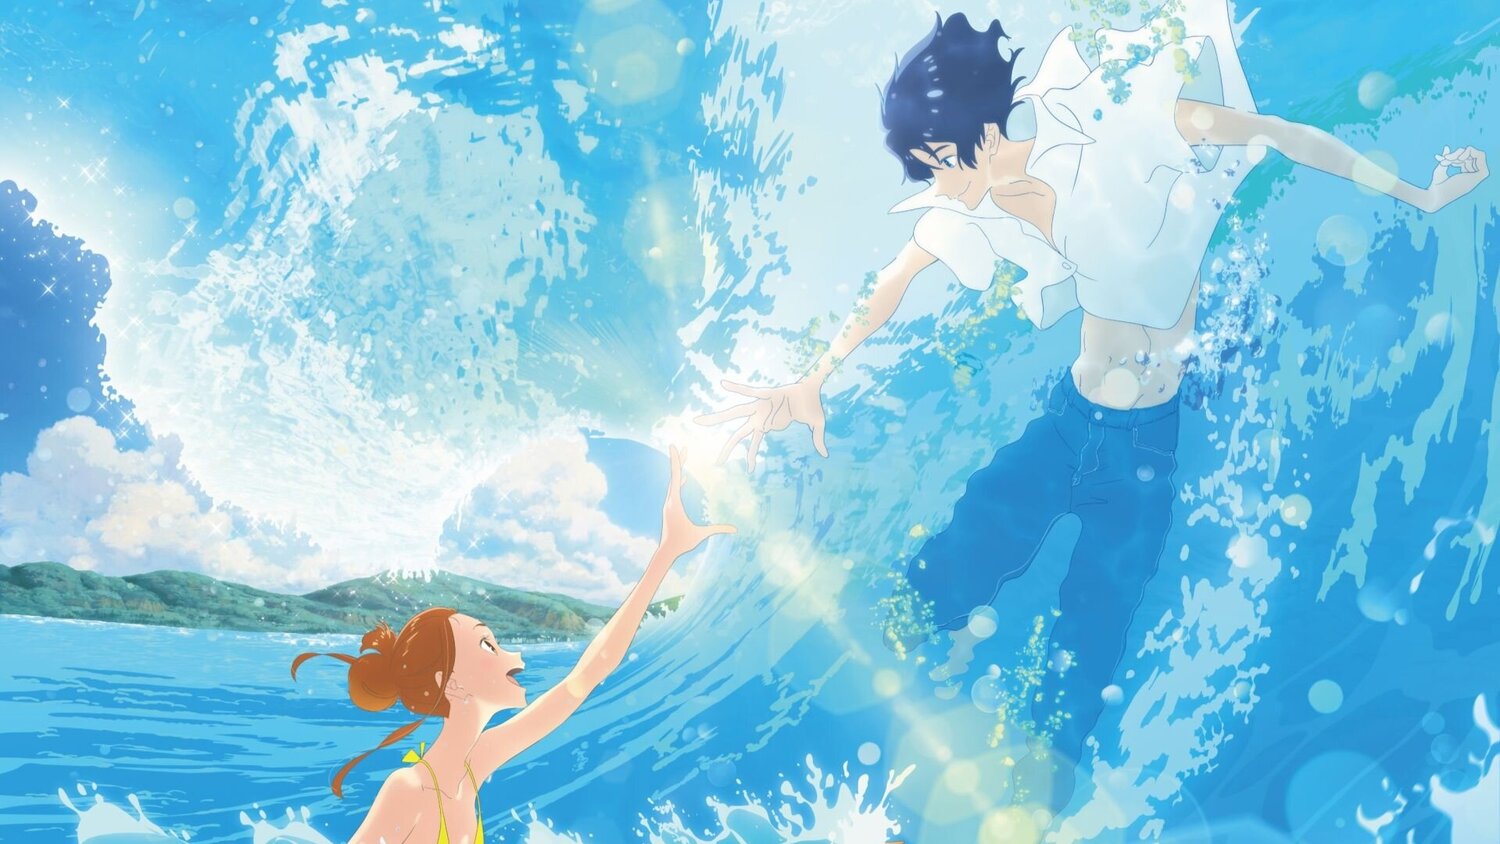 Ride Your Wave Review: Touching anime breaks conventions